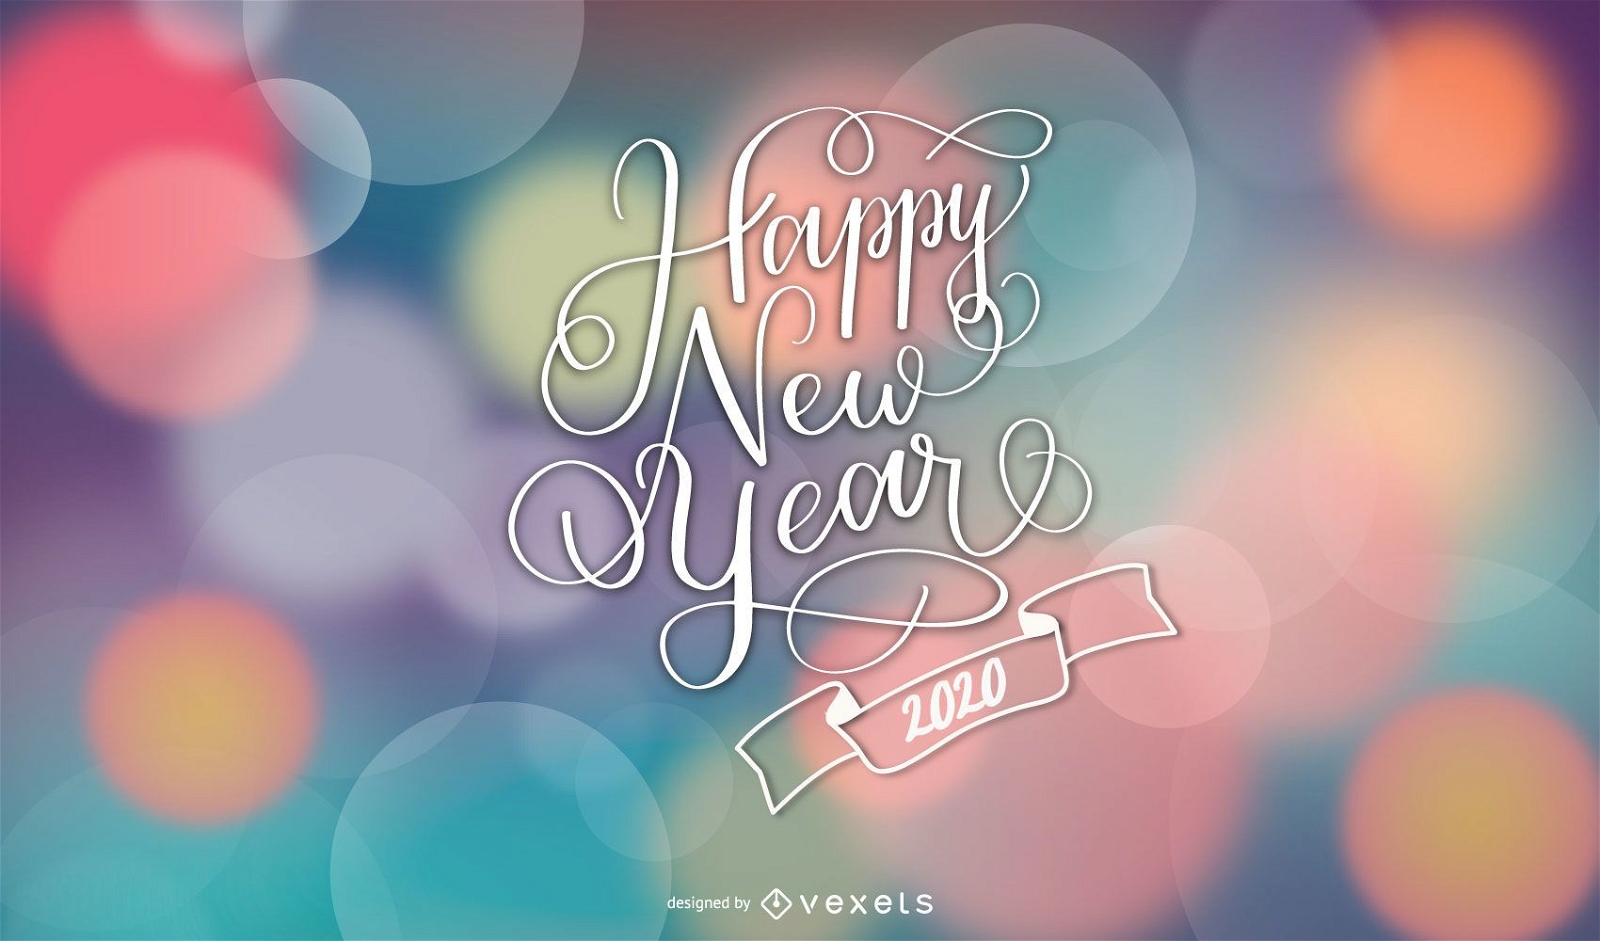 New Year Greetings on Shiny Colorful Bokeh Background